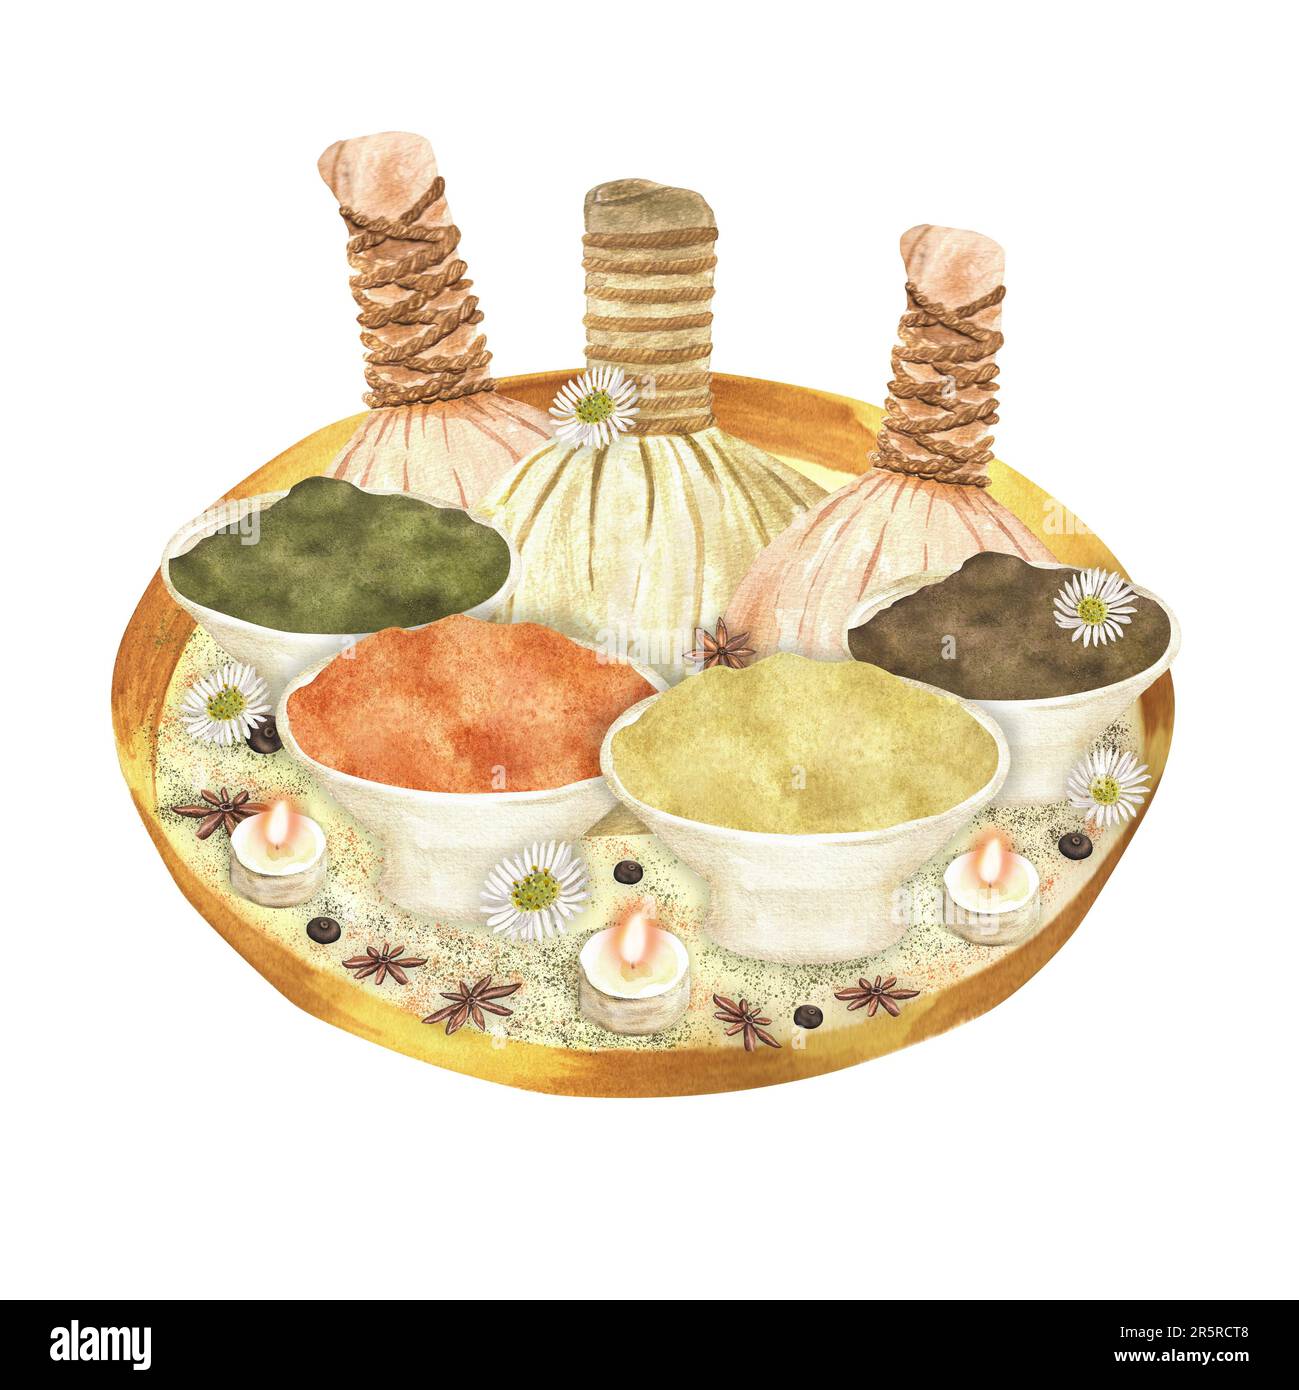 Hand drawn watercolor illustration. Ayurveda treatment. Herbal balls for massage on the tray with candles and spices. Stock Photo